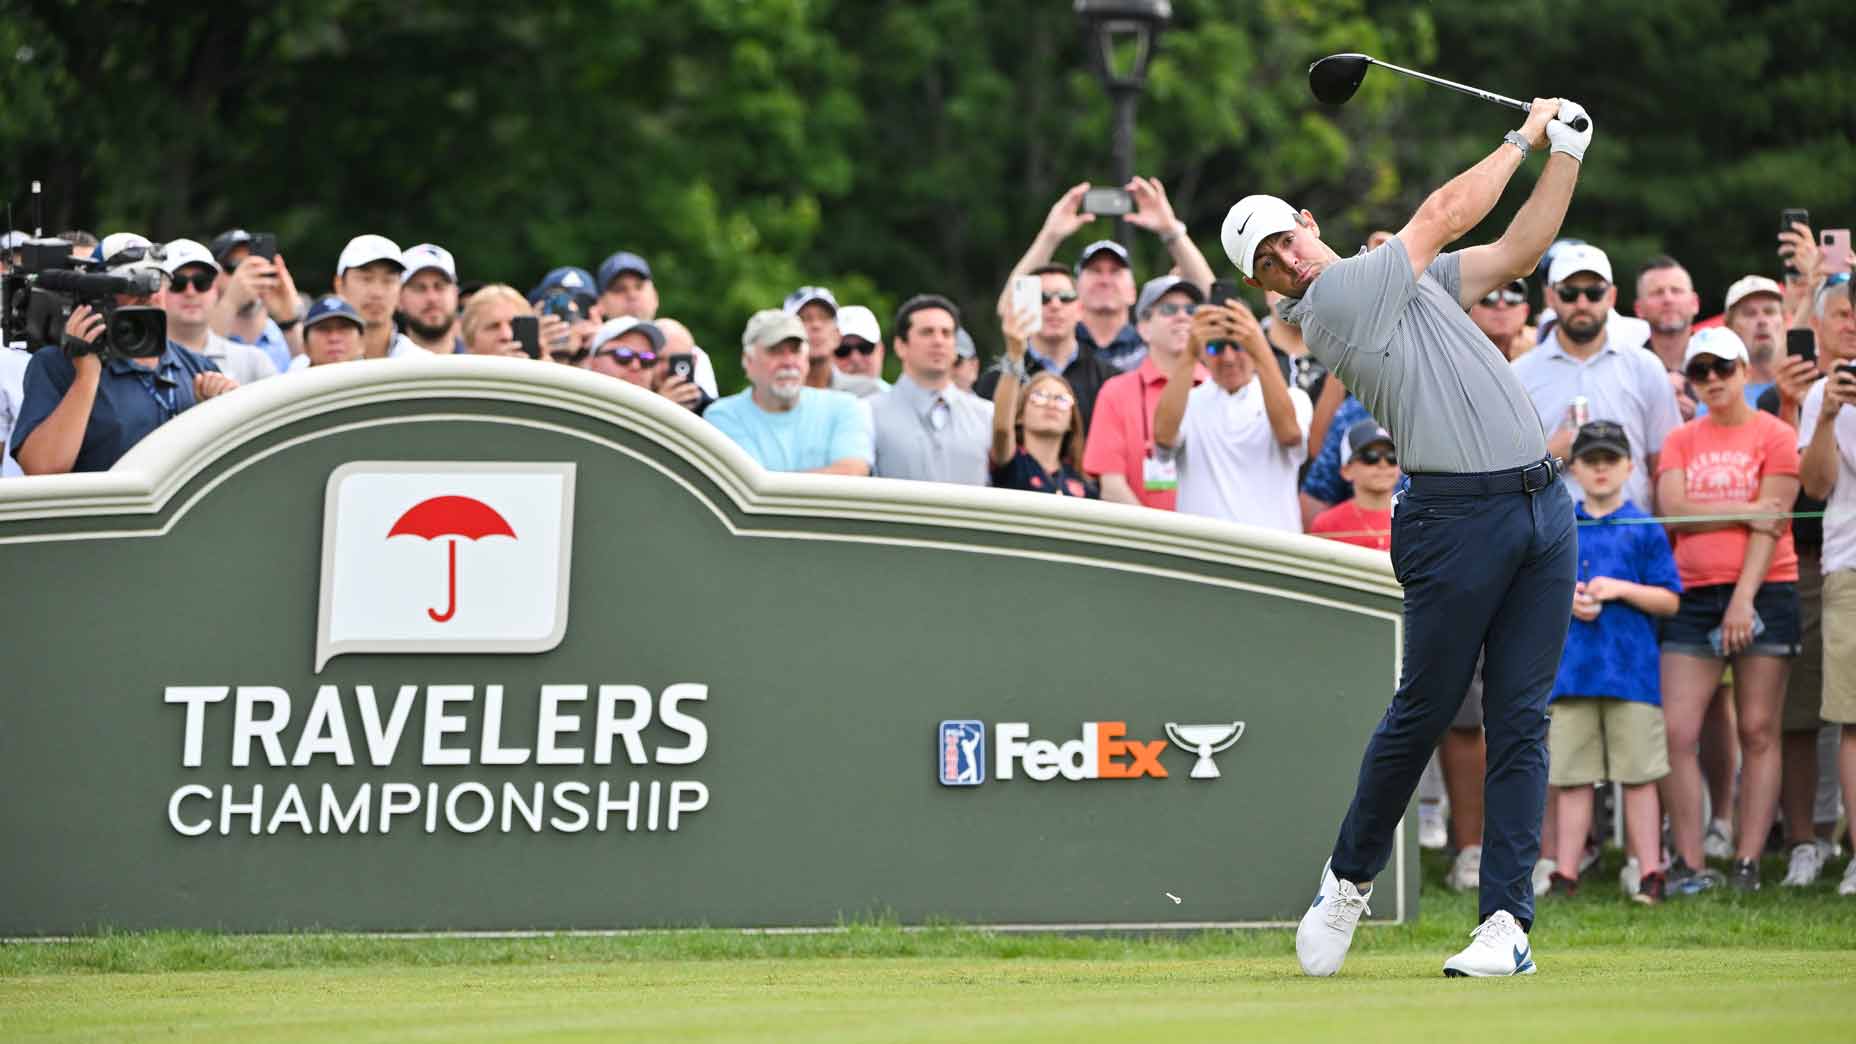 Rory McIlroy hits drive at 2022 Travelers Championship